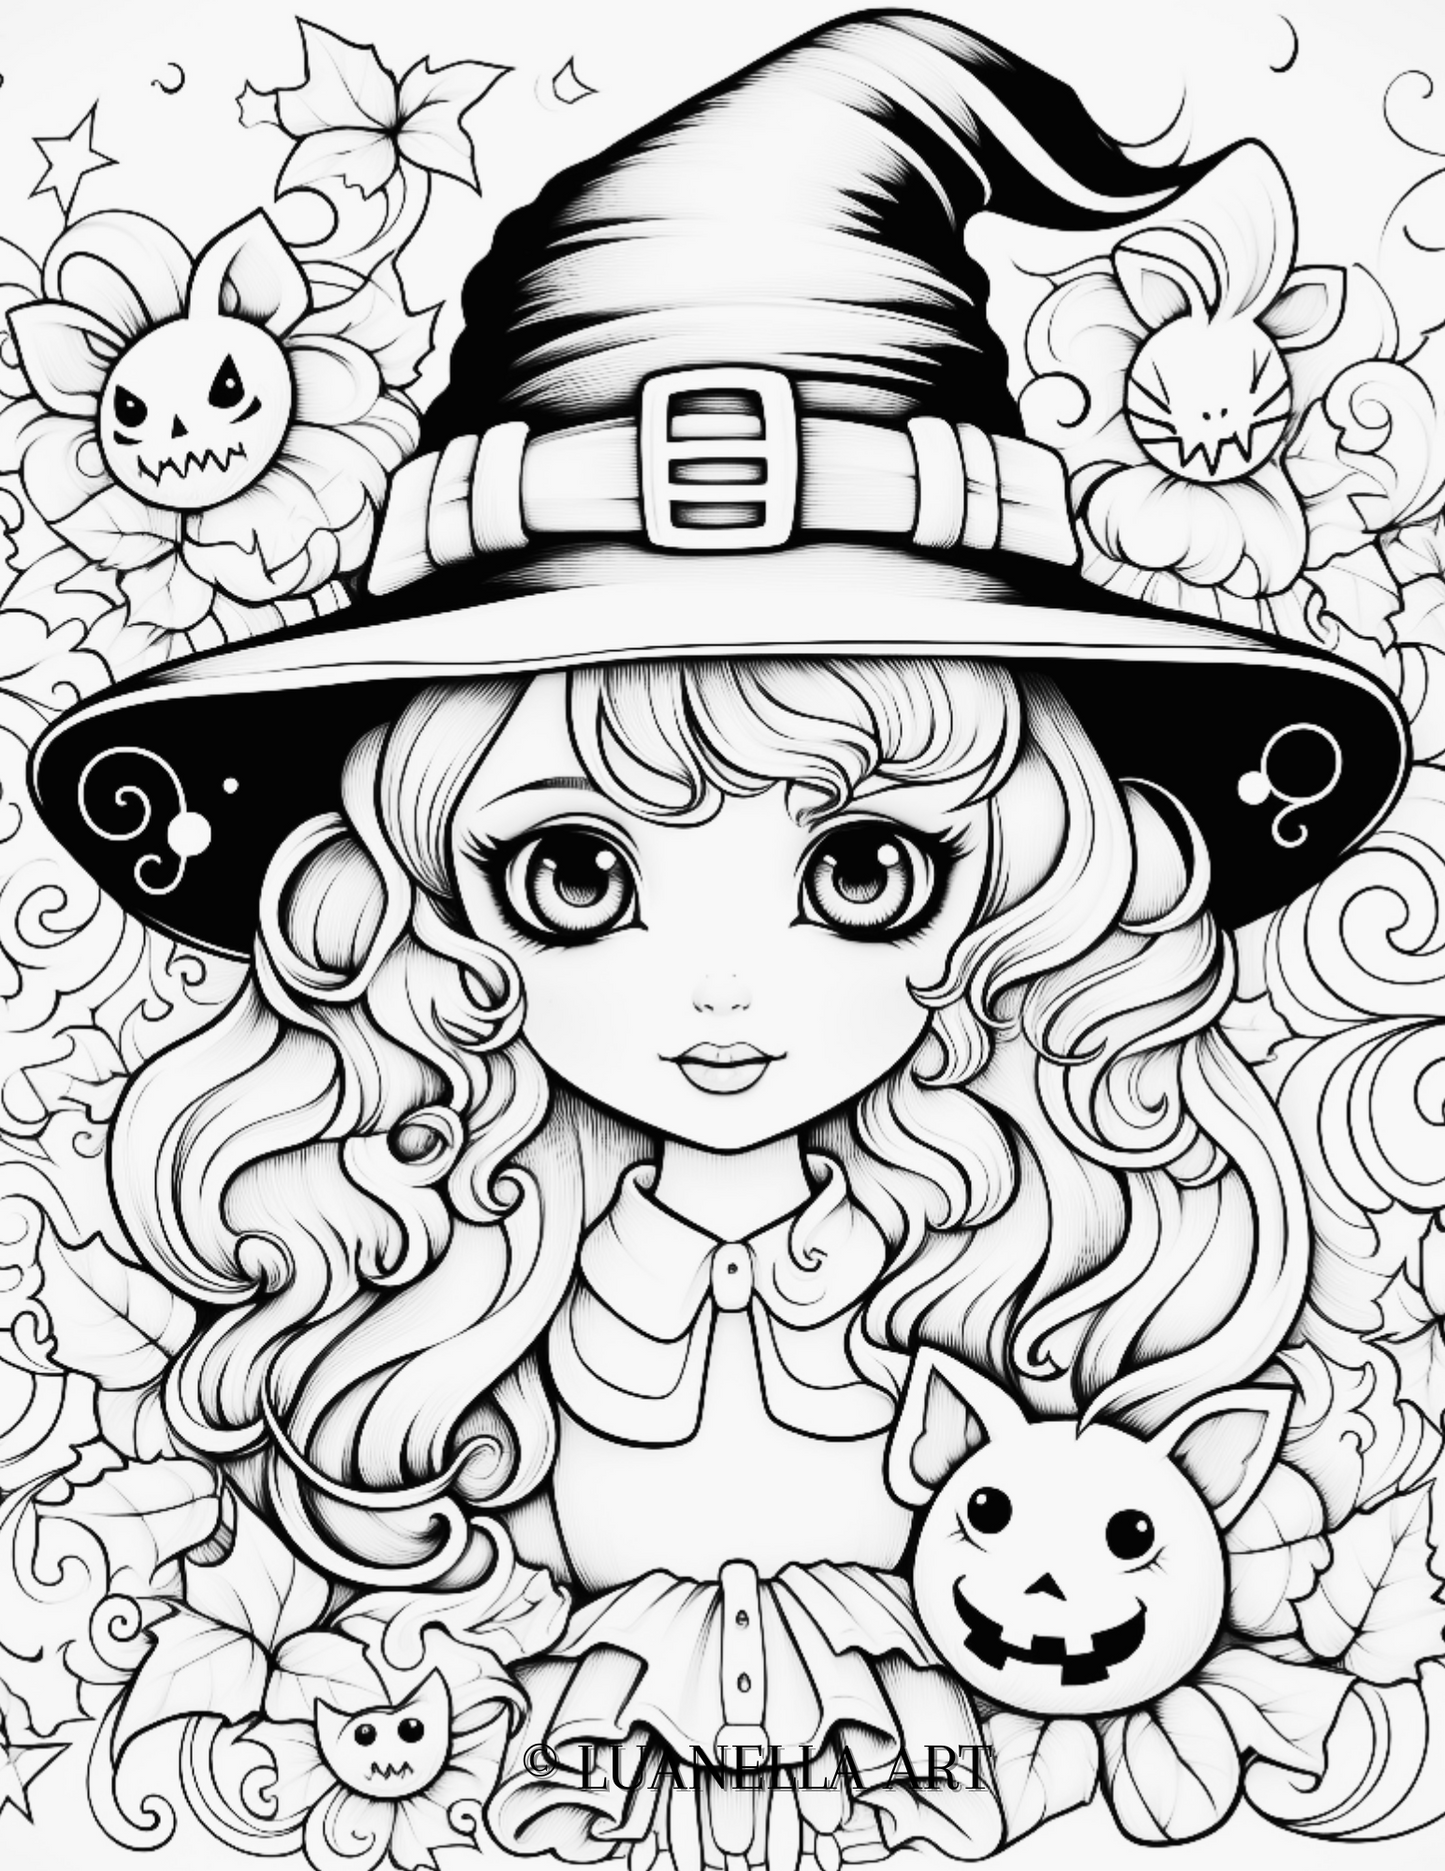 Cute Halloween WitchyWitch | Coloring Page | Instant Digital Download